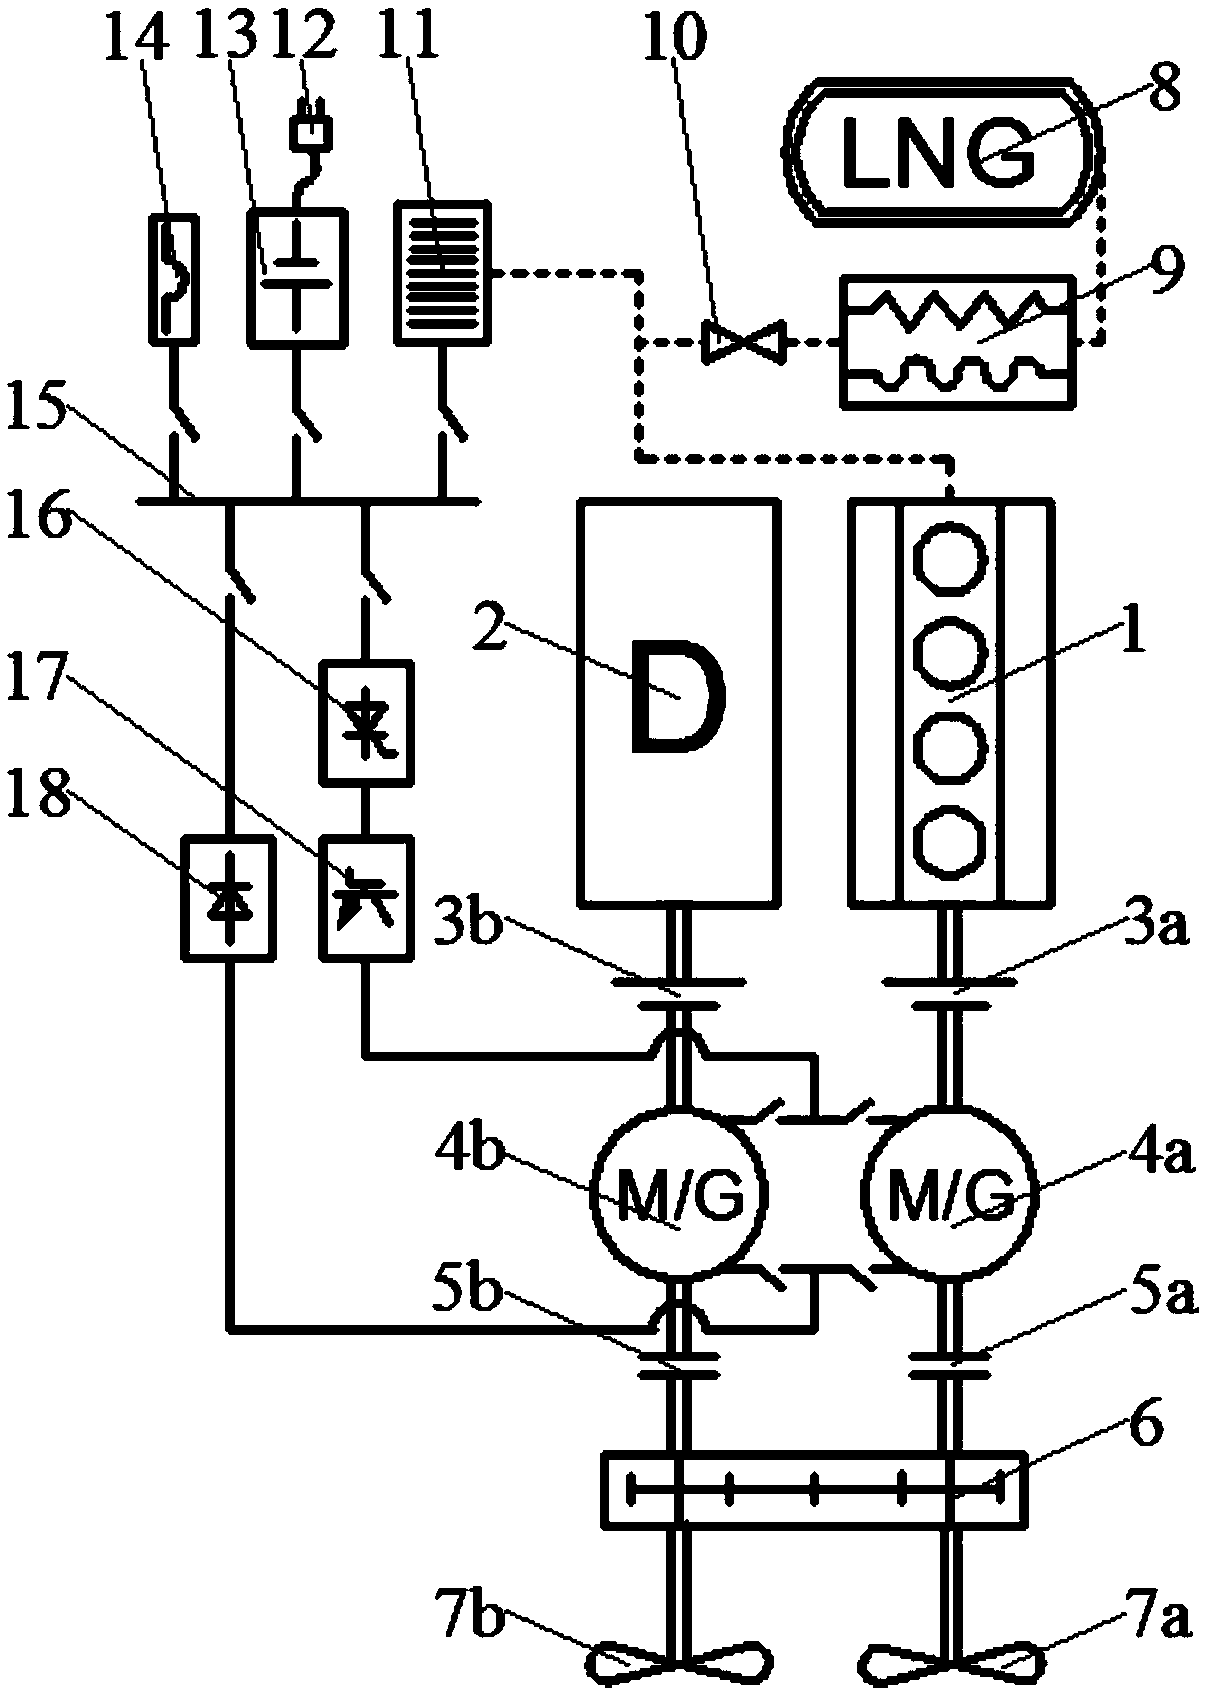 Dual-shaft ship hybrid power system with fuel cell